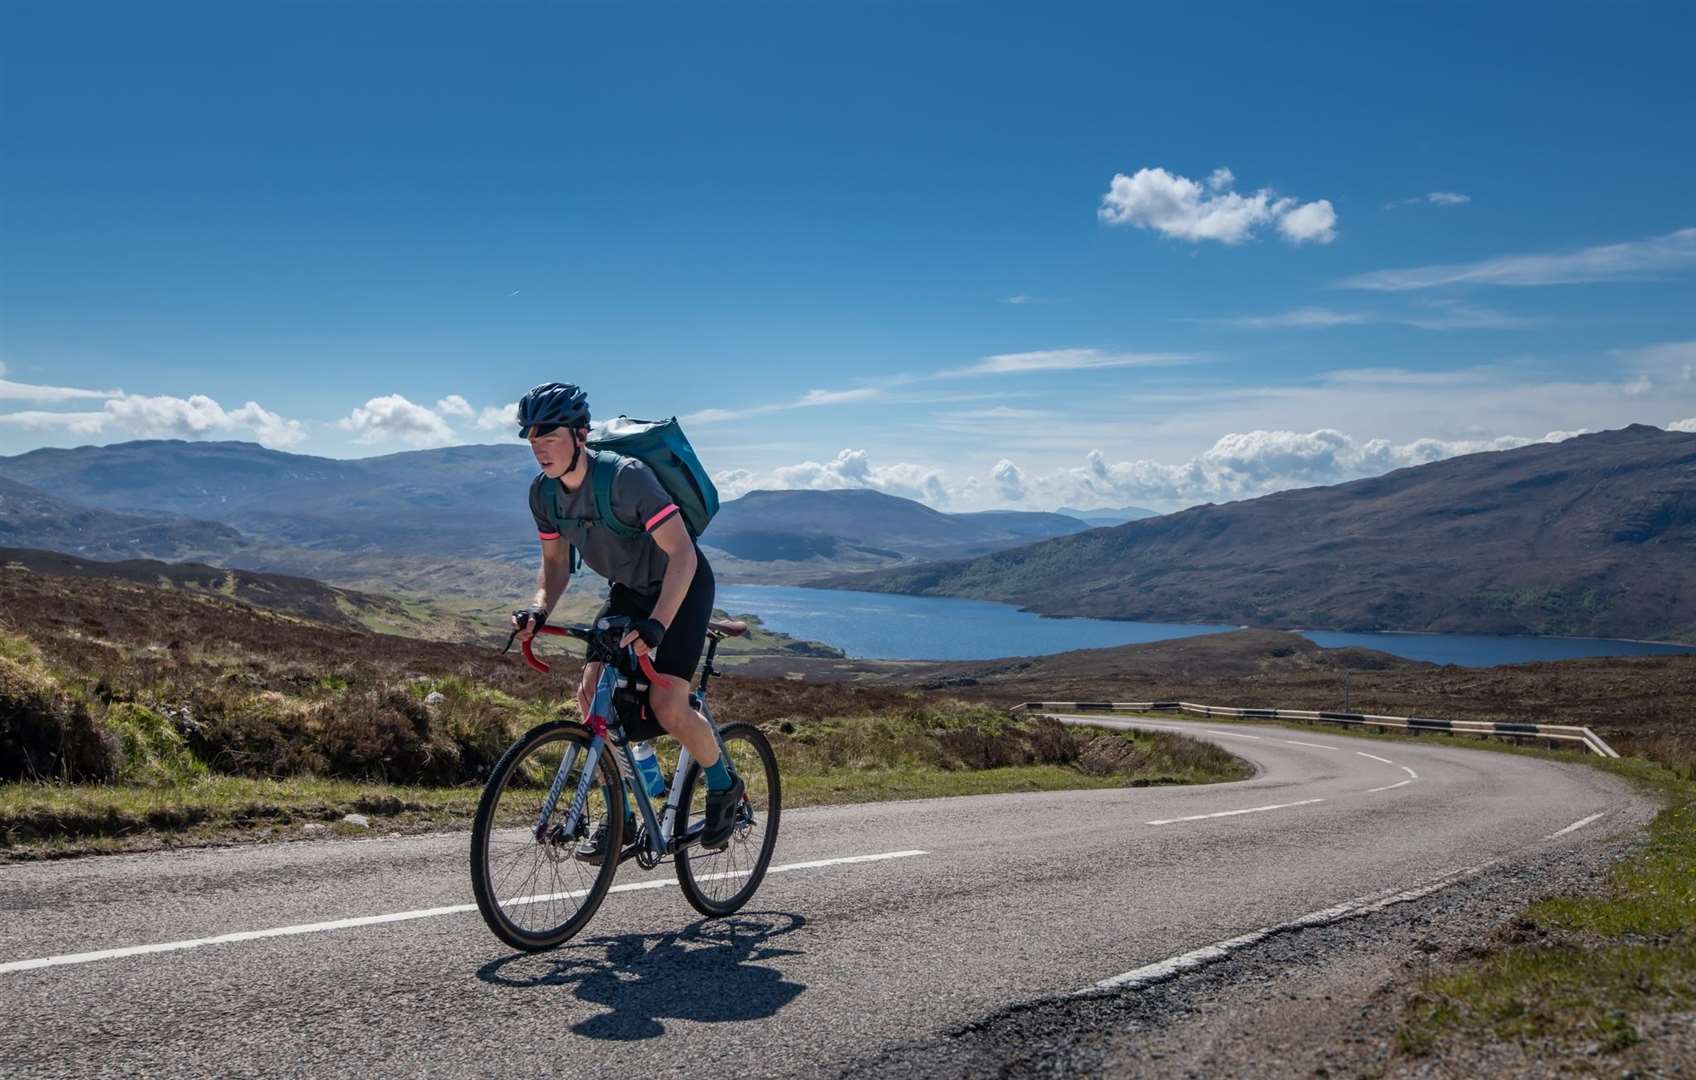 Discover Scotland 2022 aims to encourage visitors to rediscover the Highlands now that oandemic restrictions have lifted. Picture: Liam Anderstrem